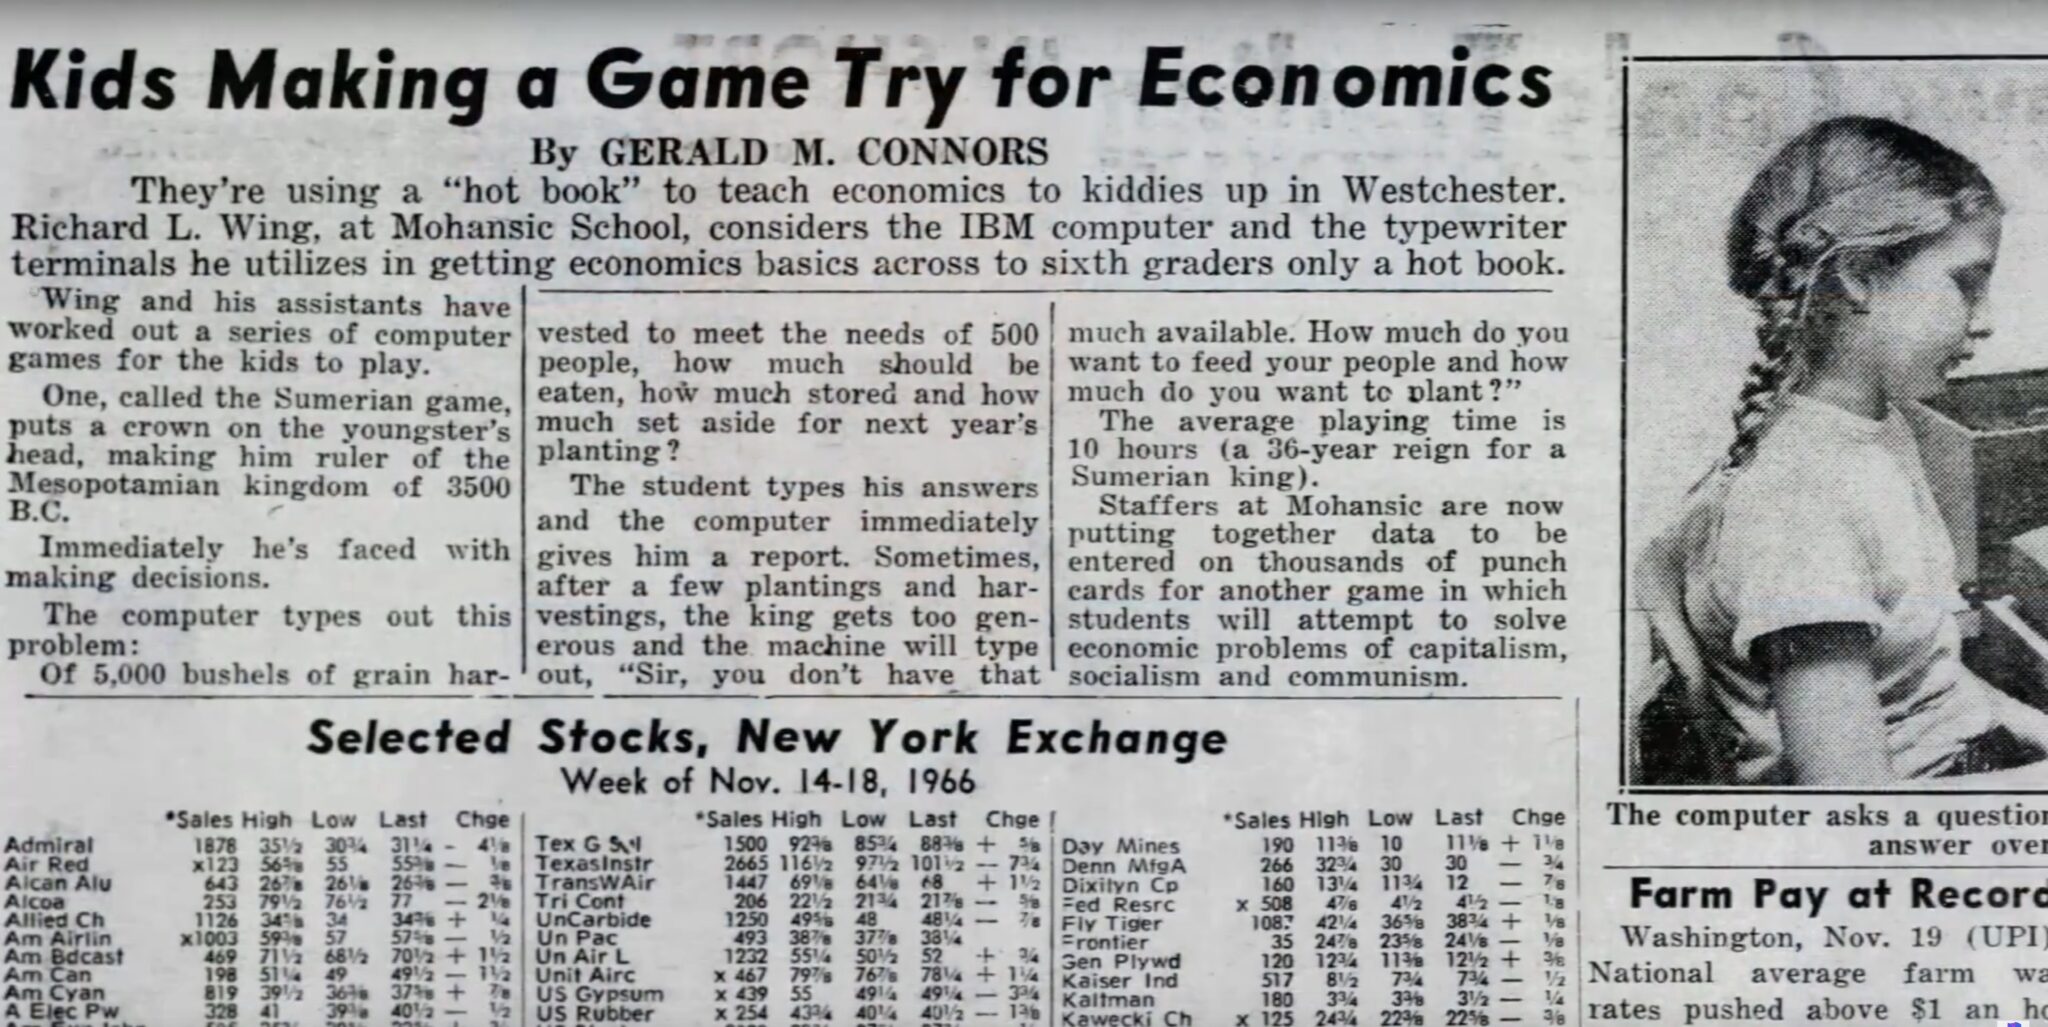 (The Sumerian Game also ends up in the business section of various newspapers, here in November 1966. The Texas Instruments share is just at 101 US dollars.)